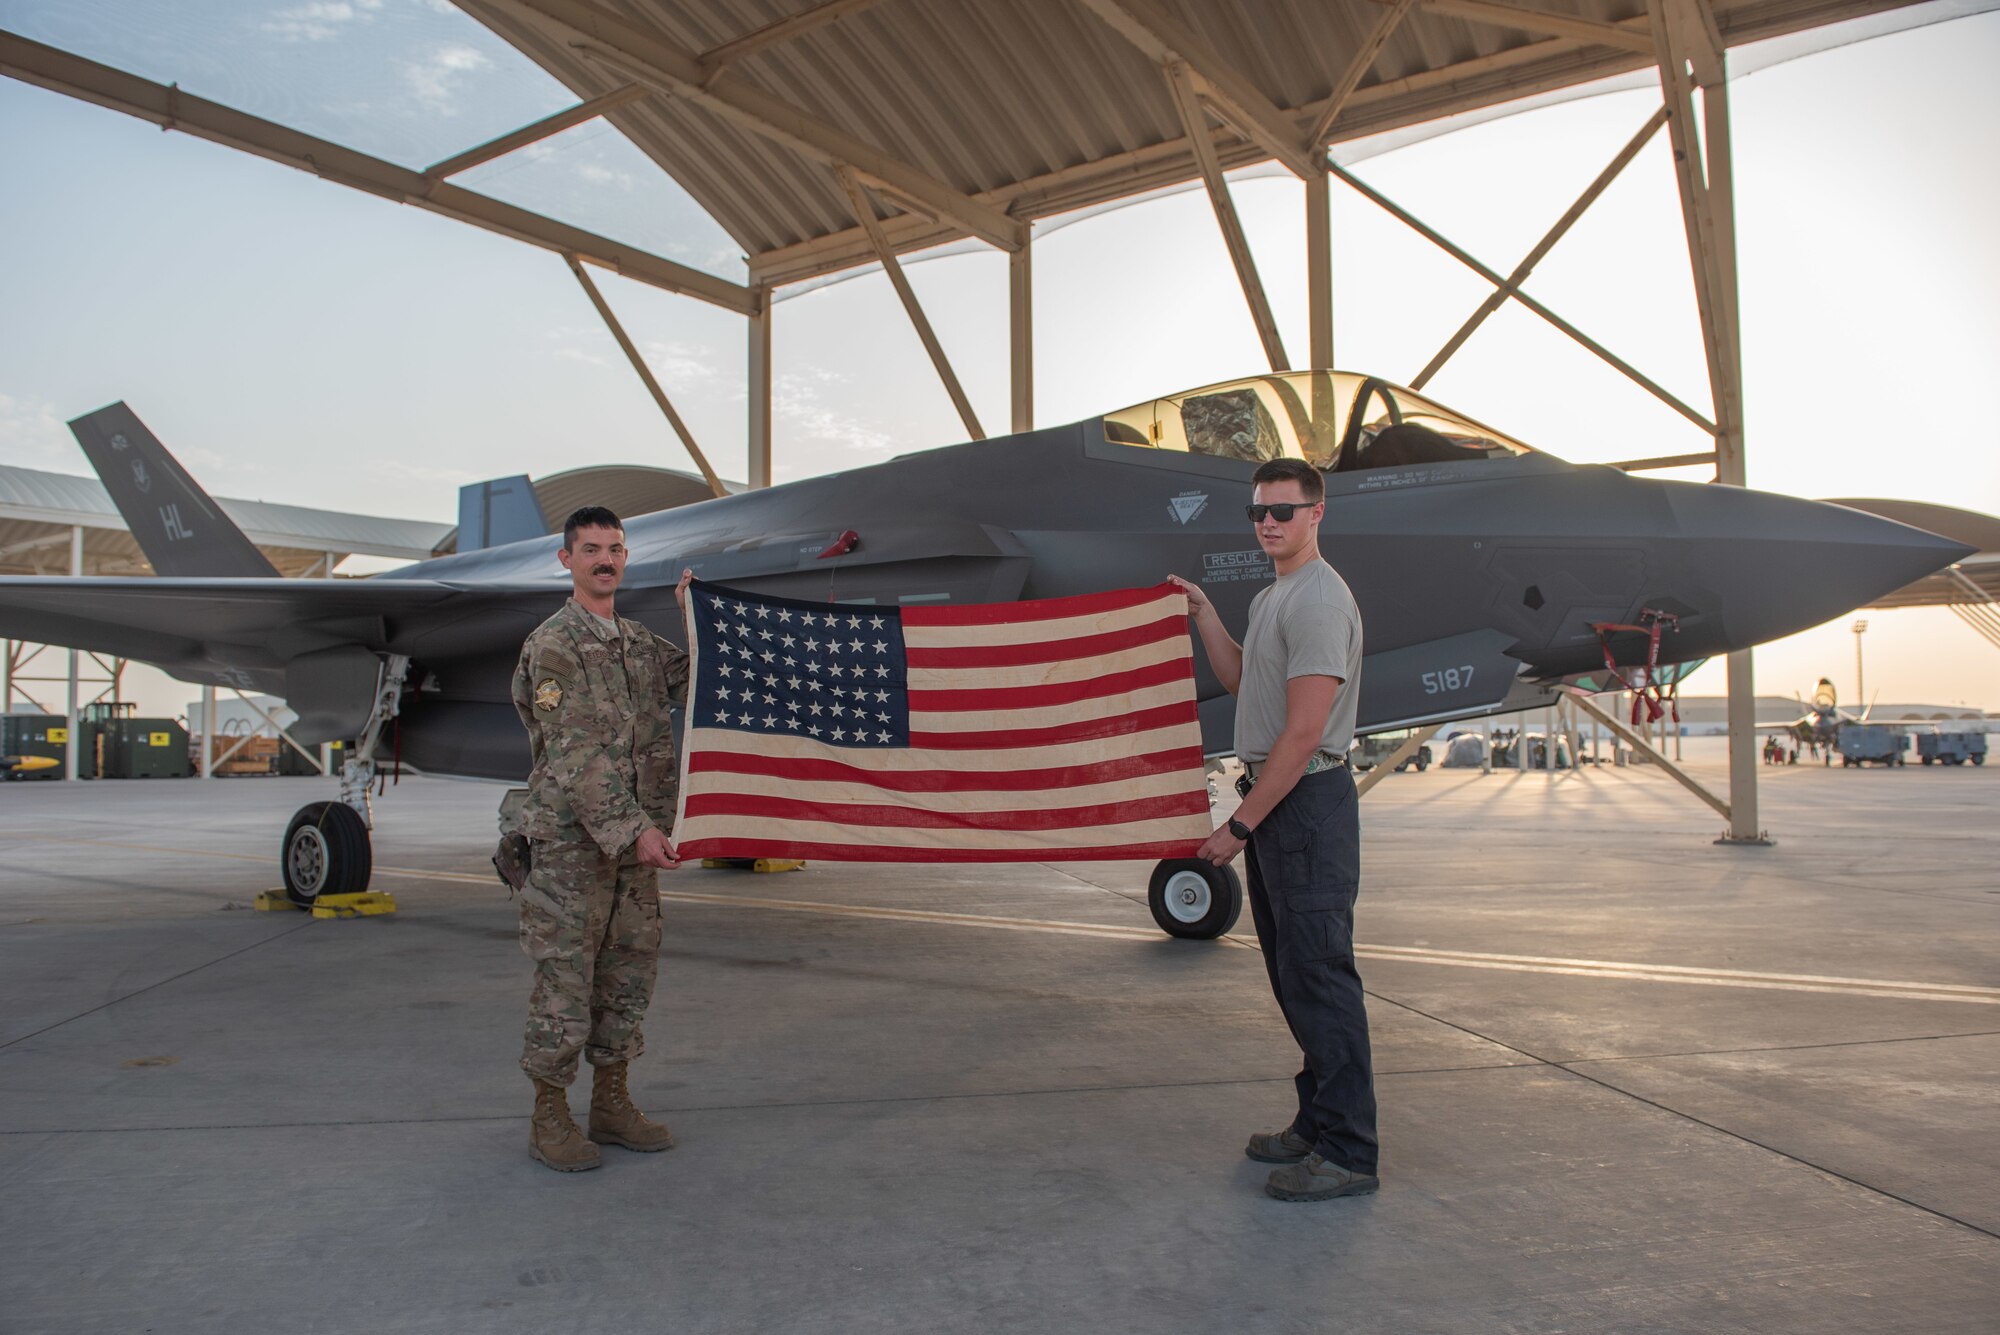 Tech. Sgt. Kenneth Peterson, left, and Senior Airman Quinton Bullock, 380th Expeditionary Aircraft Maintenance Squadron F-35A Lightning II crew chiefs, hold a 48-star flag June 6, 2019, at Al Dhafra Air Base, United Arab Emirates.